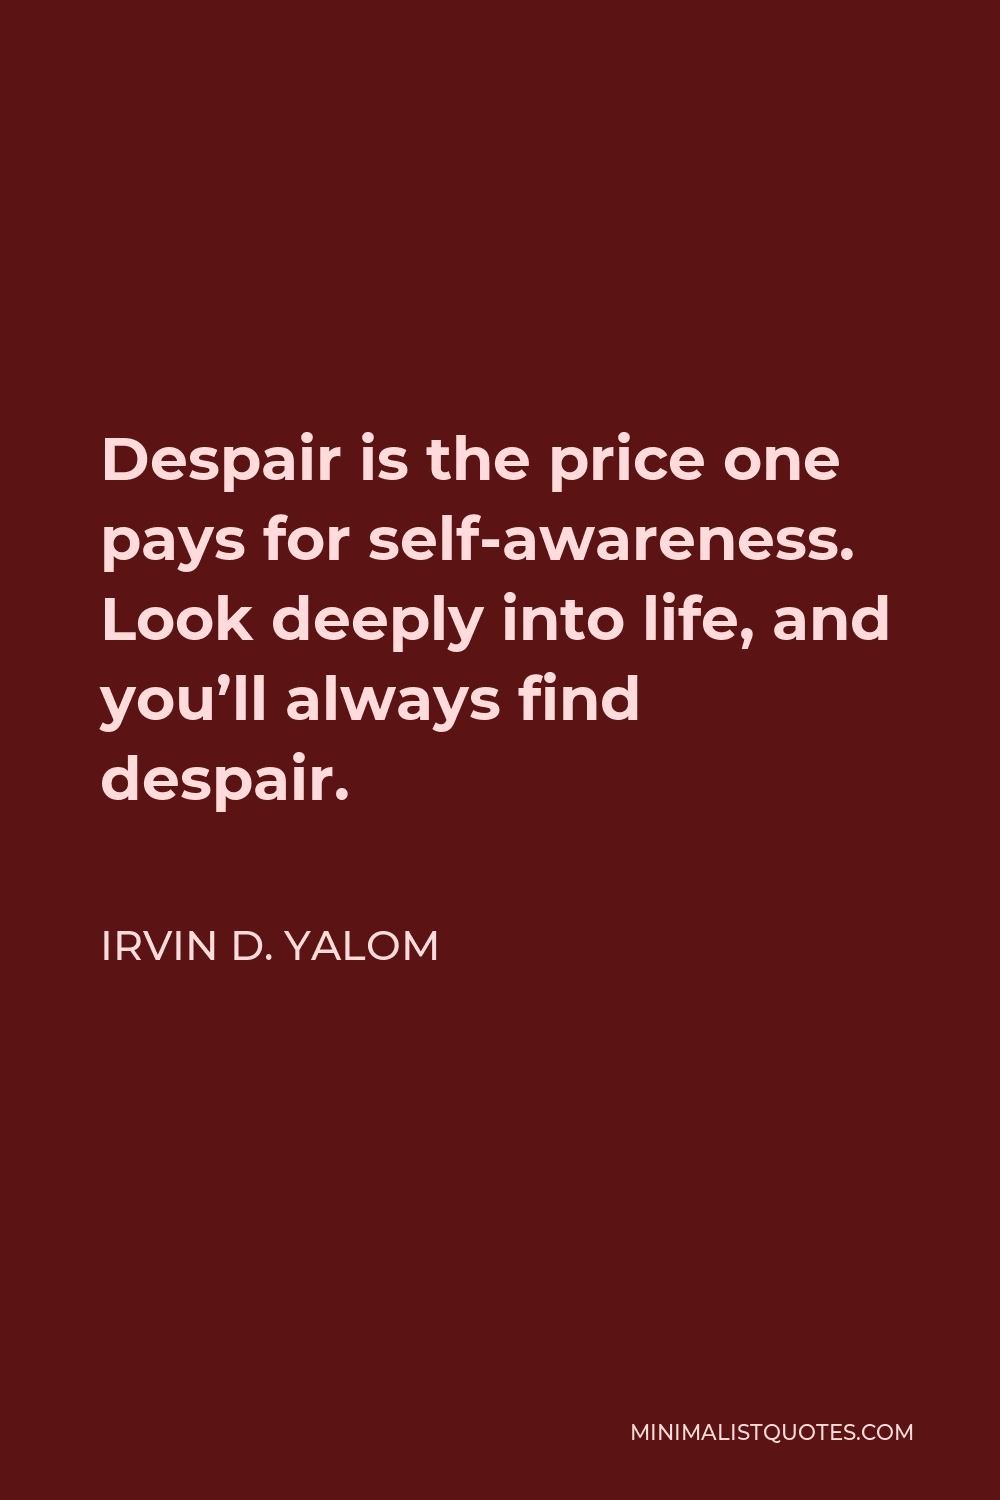 Irvin D. Yalom Quote - Despair is the price one pays for self-awareness. Look deeply into life, and you’ll always find despair.